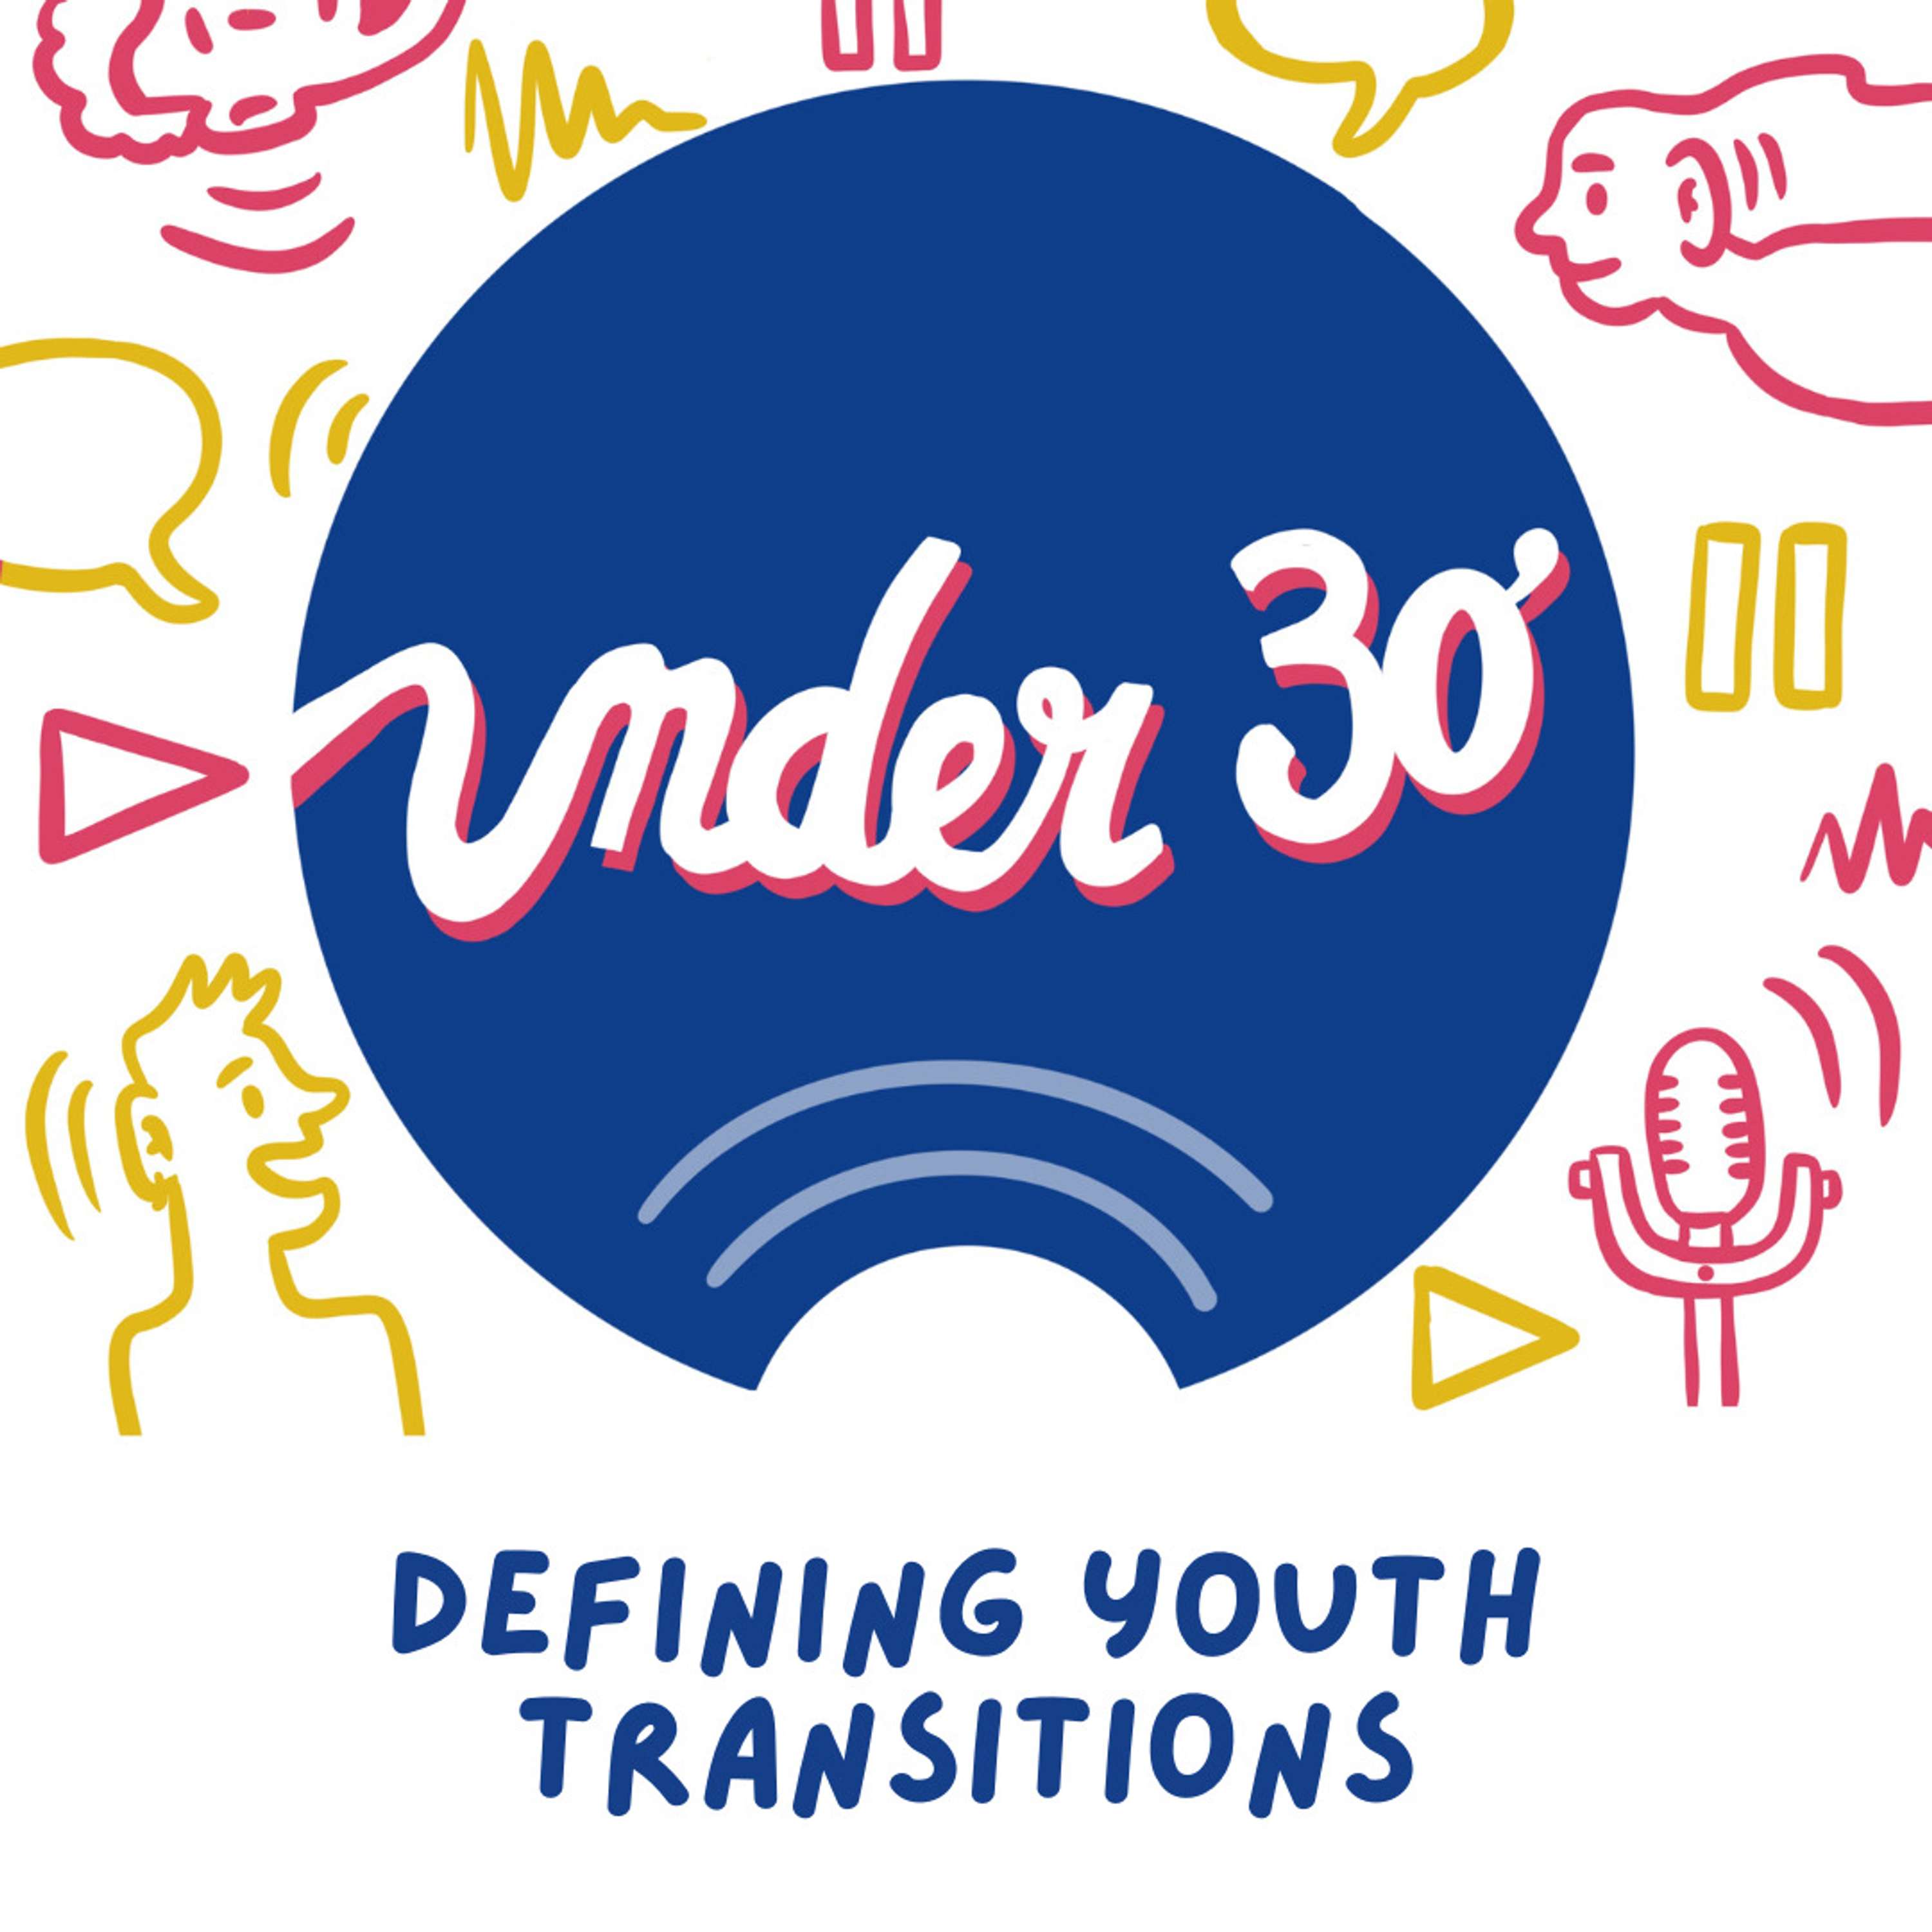 Defining youth transitions